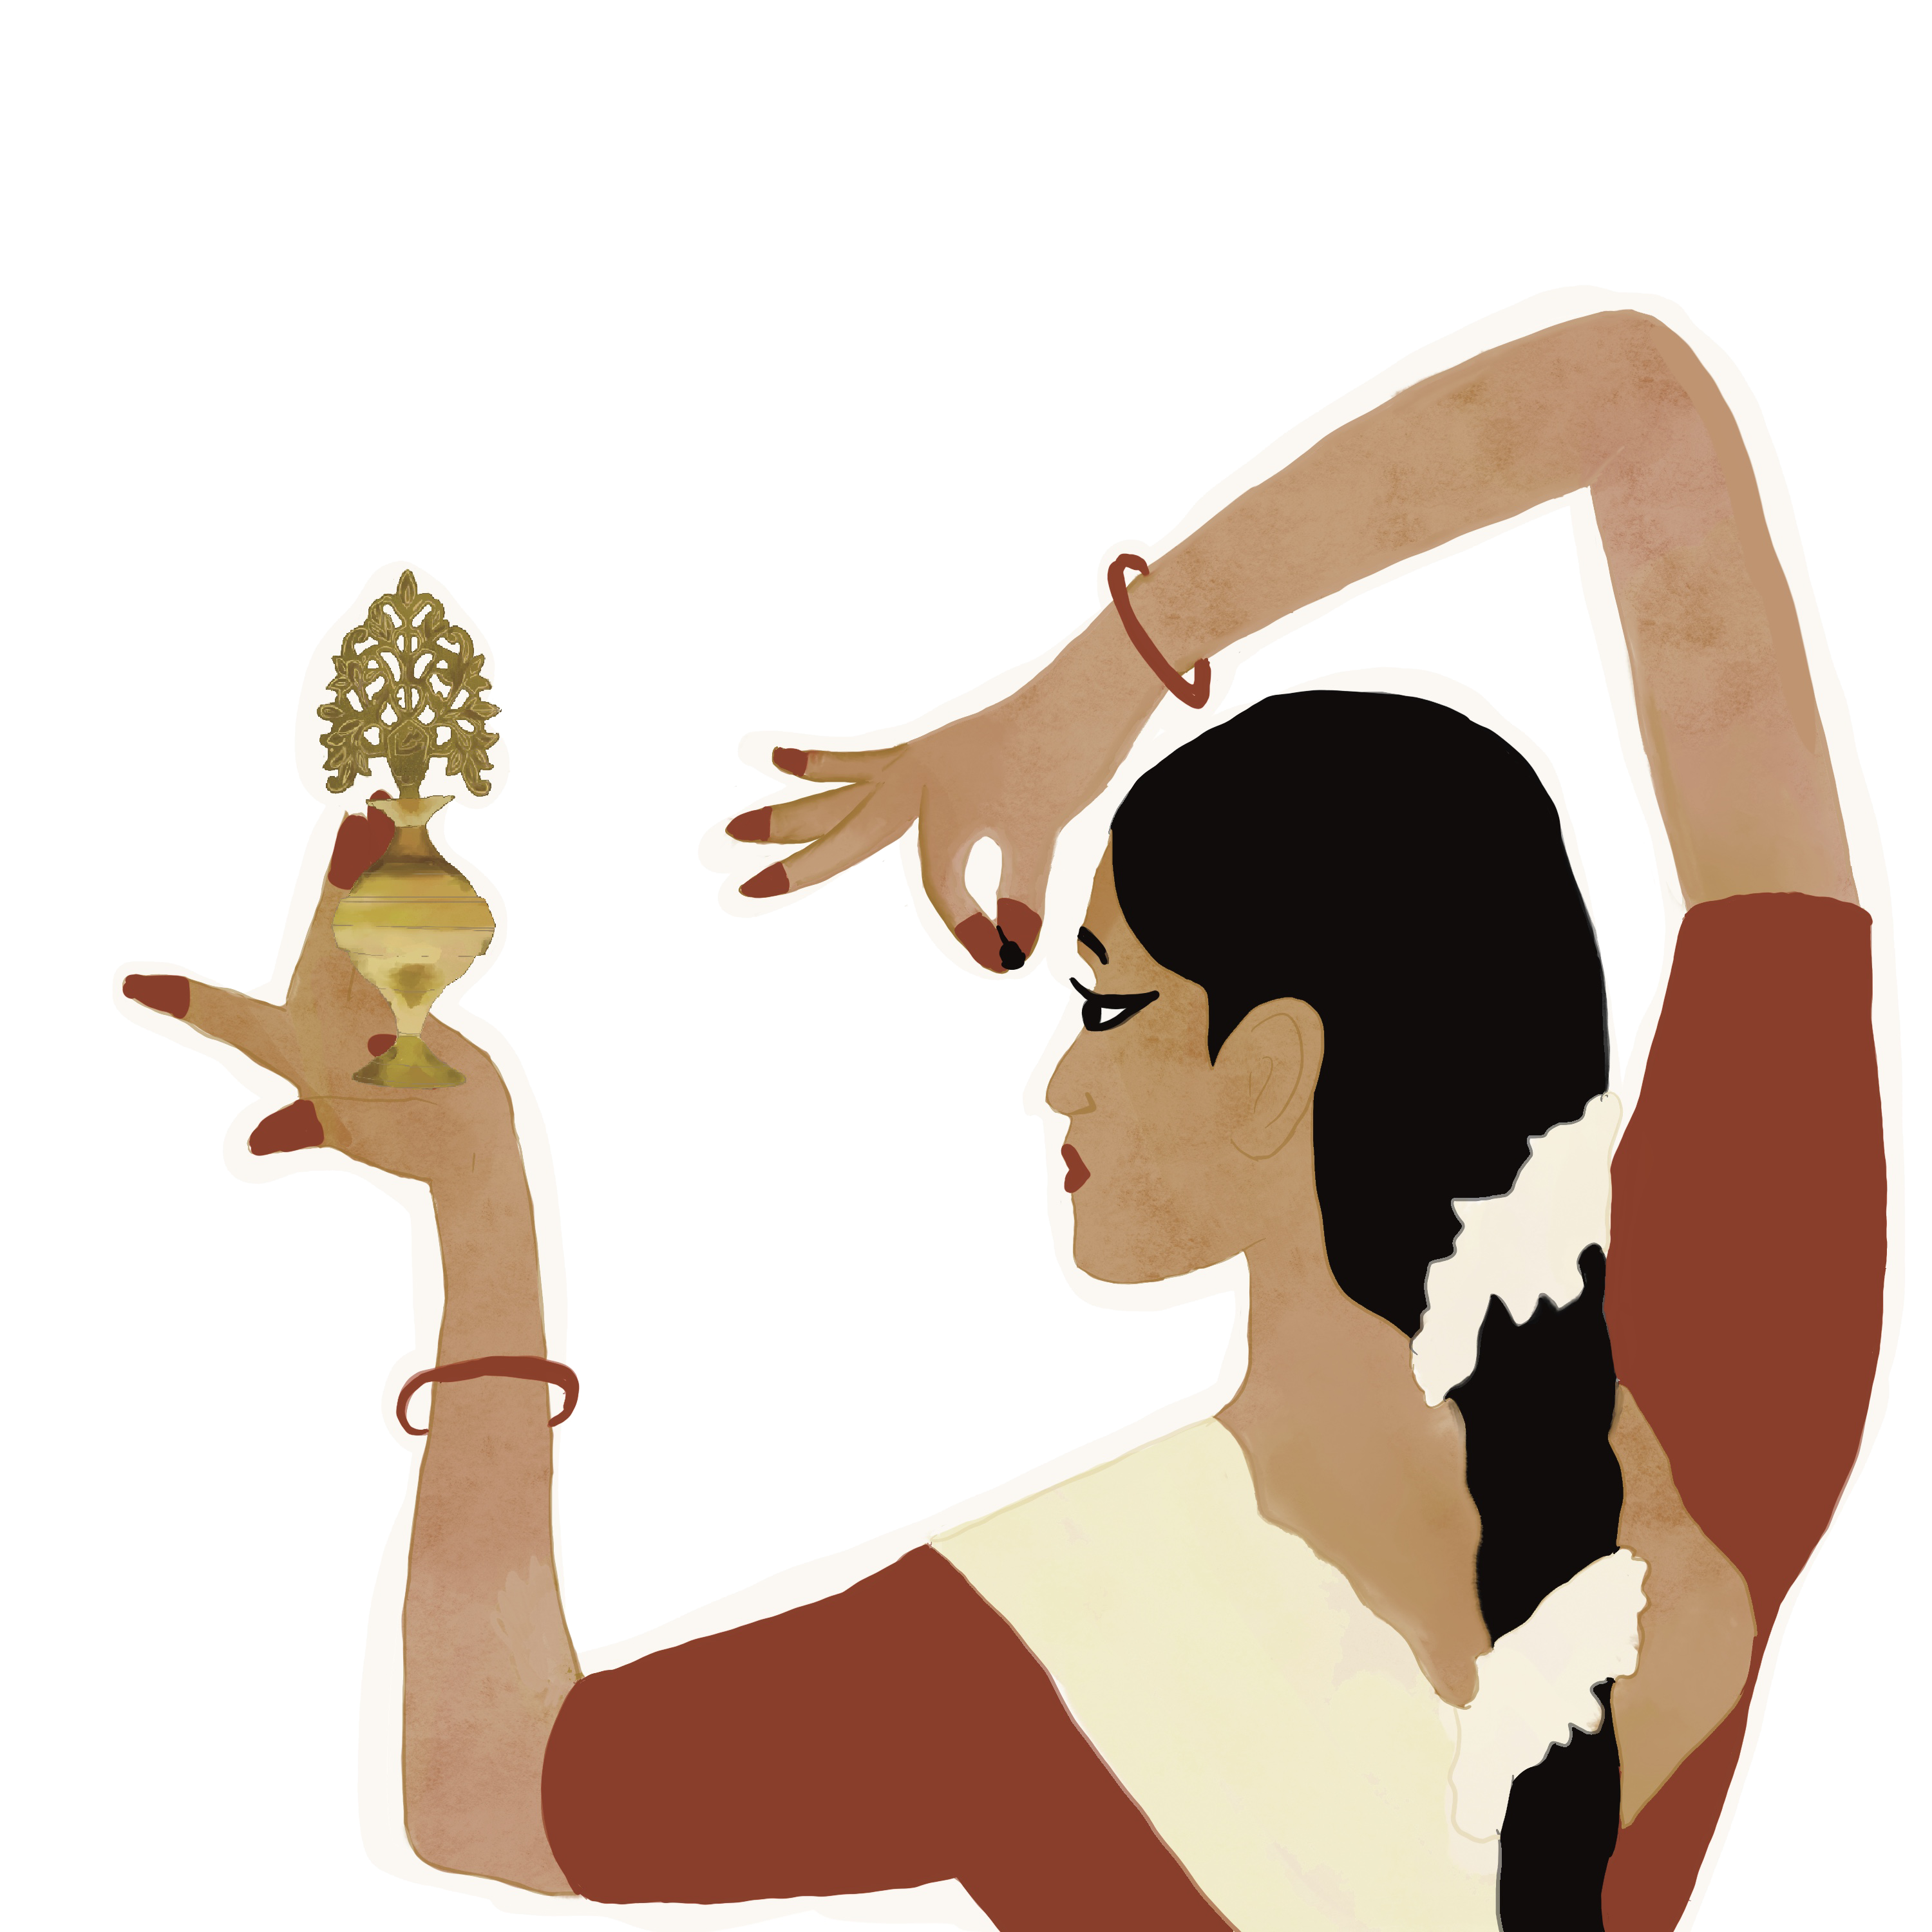 Illustration of person holding intricately designed Kohl Pot, raised in their left hand, as they pinch their fingers with their other hand. Illustration by Malini Chakrabarty.